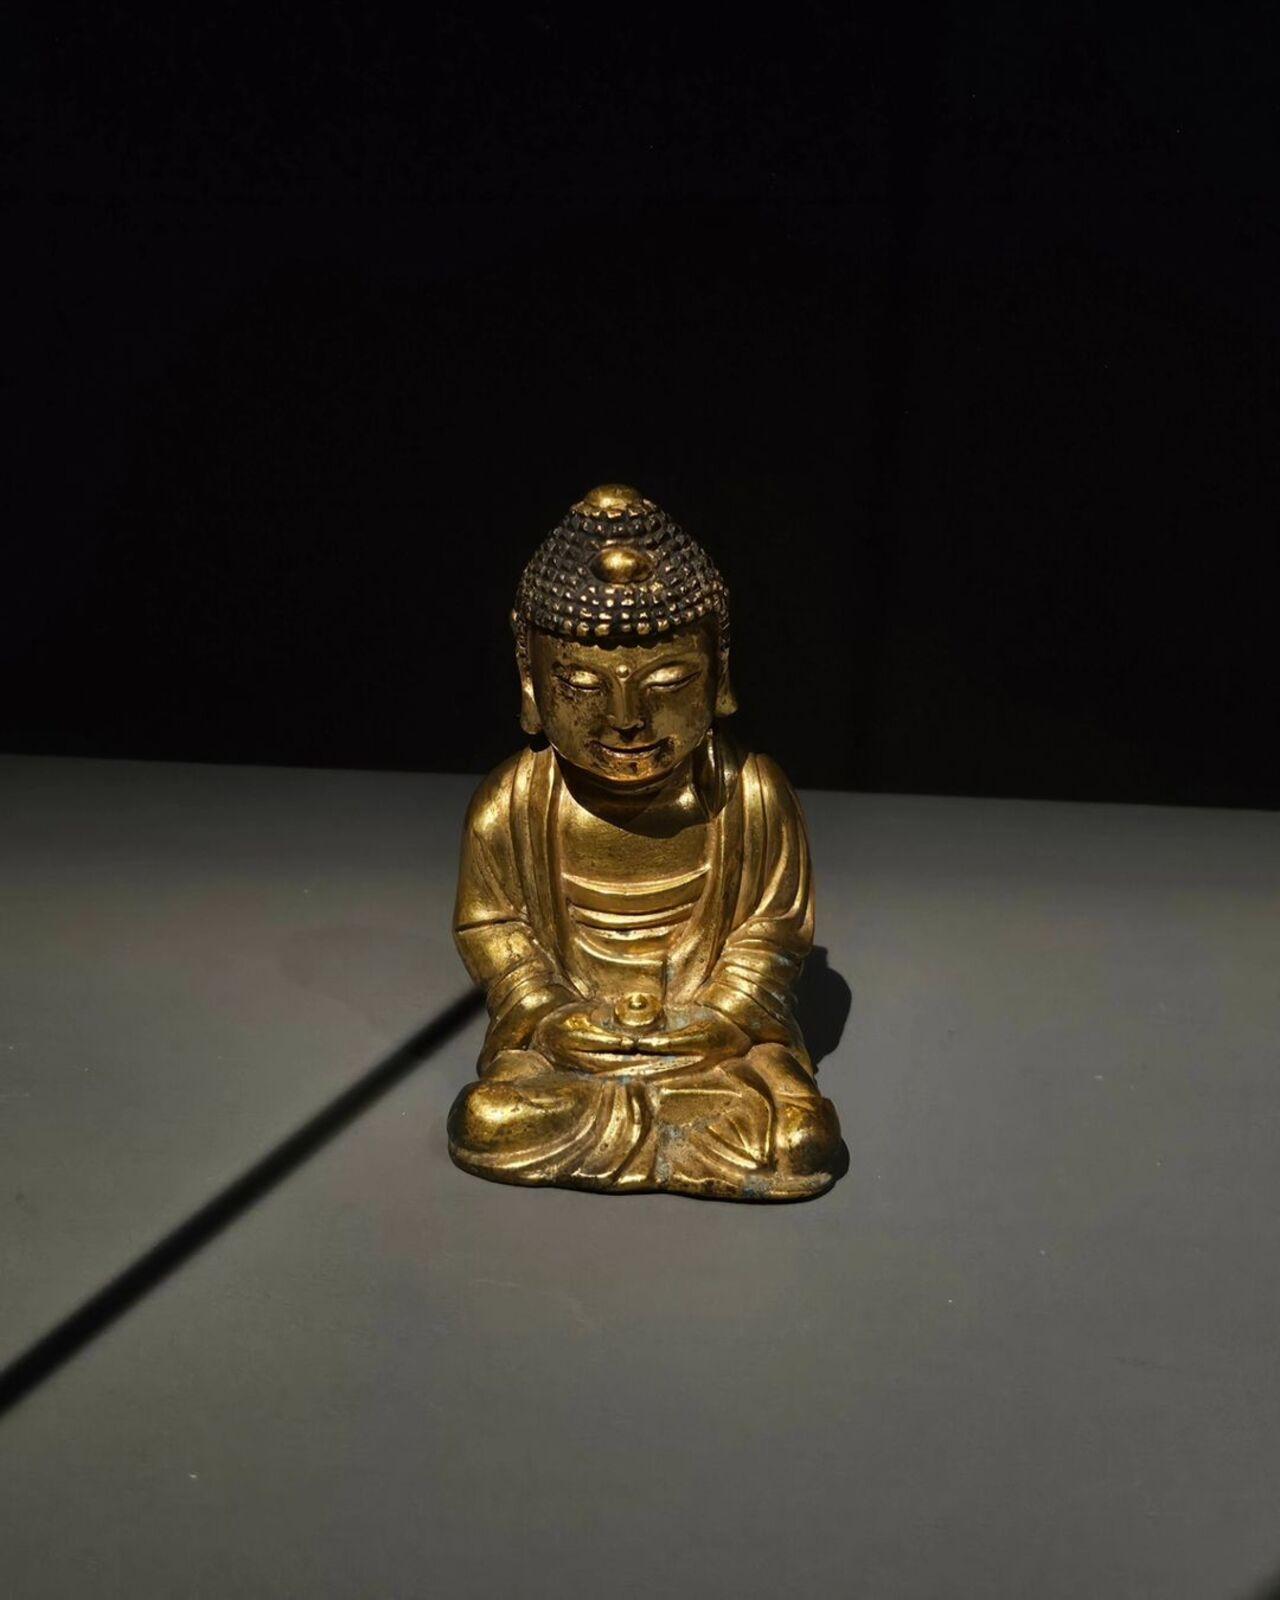 RM ended his photo series with a picture of a golden statue of Buddha. 